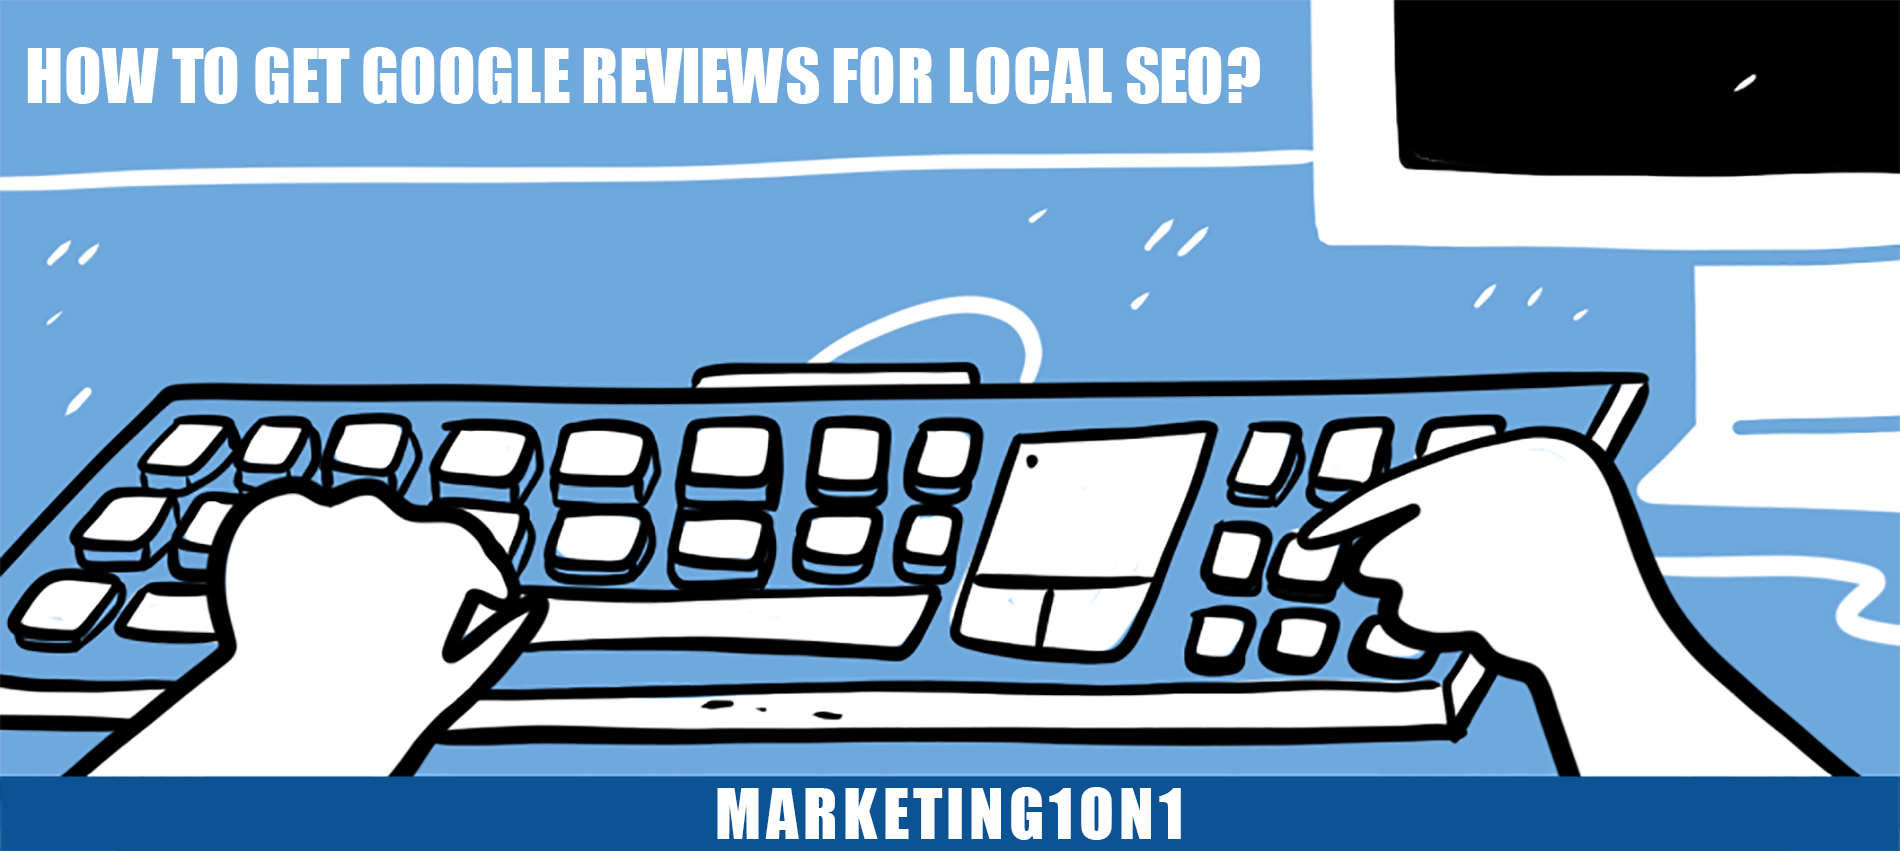 How to get google reviews for local SEO?